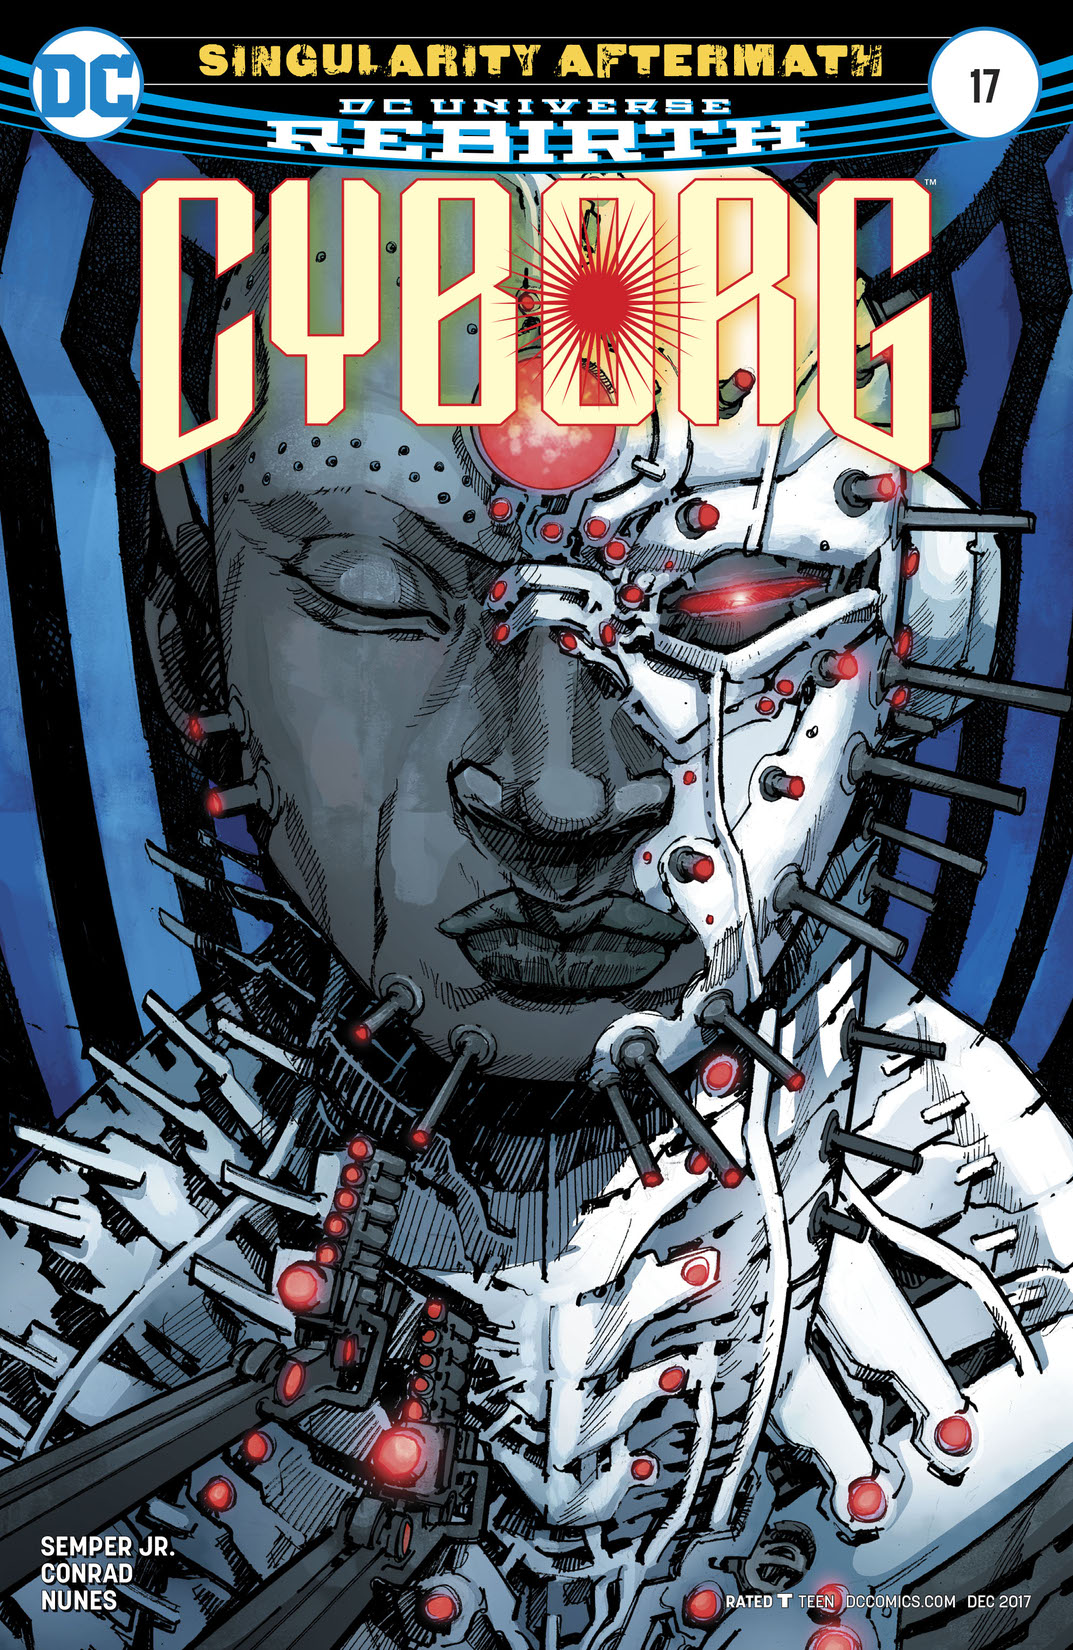 Cyborg (2016-) #17 preview images